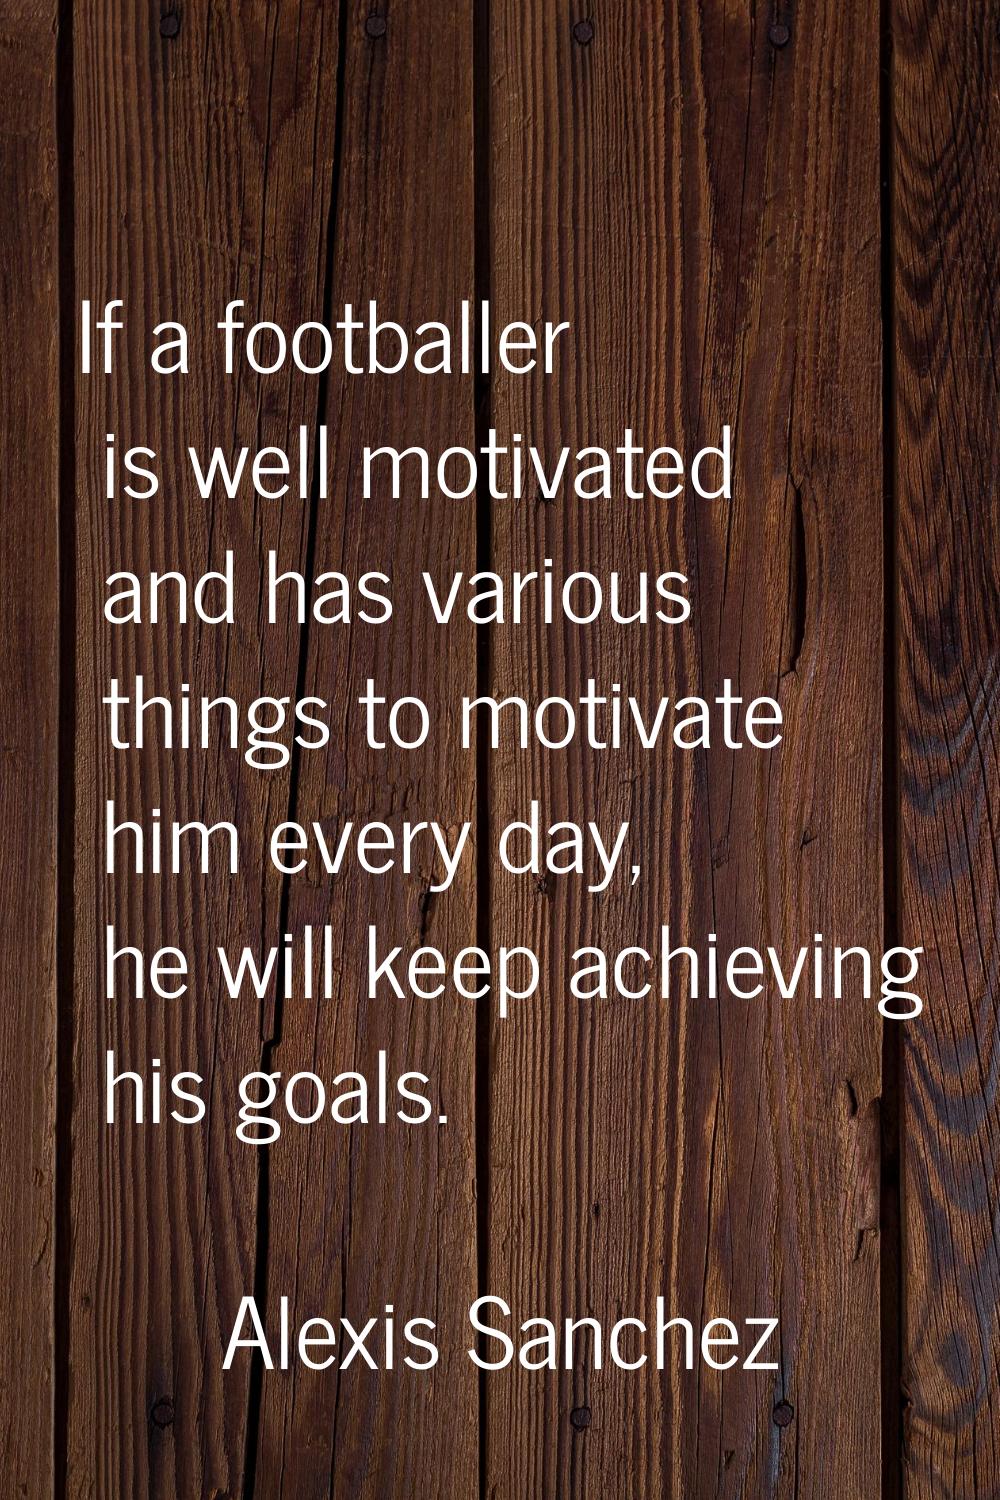 If a footballer is well motivated and has various things to motivate him every day, he will keep ac